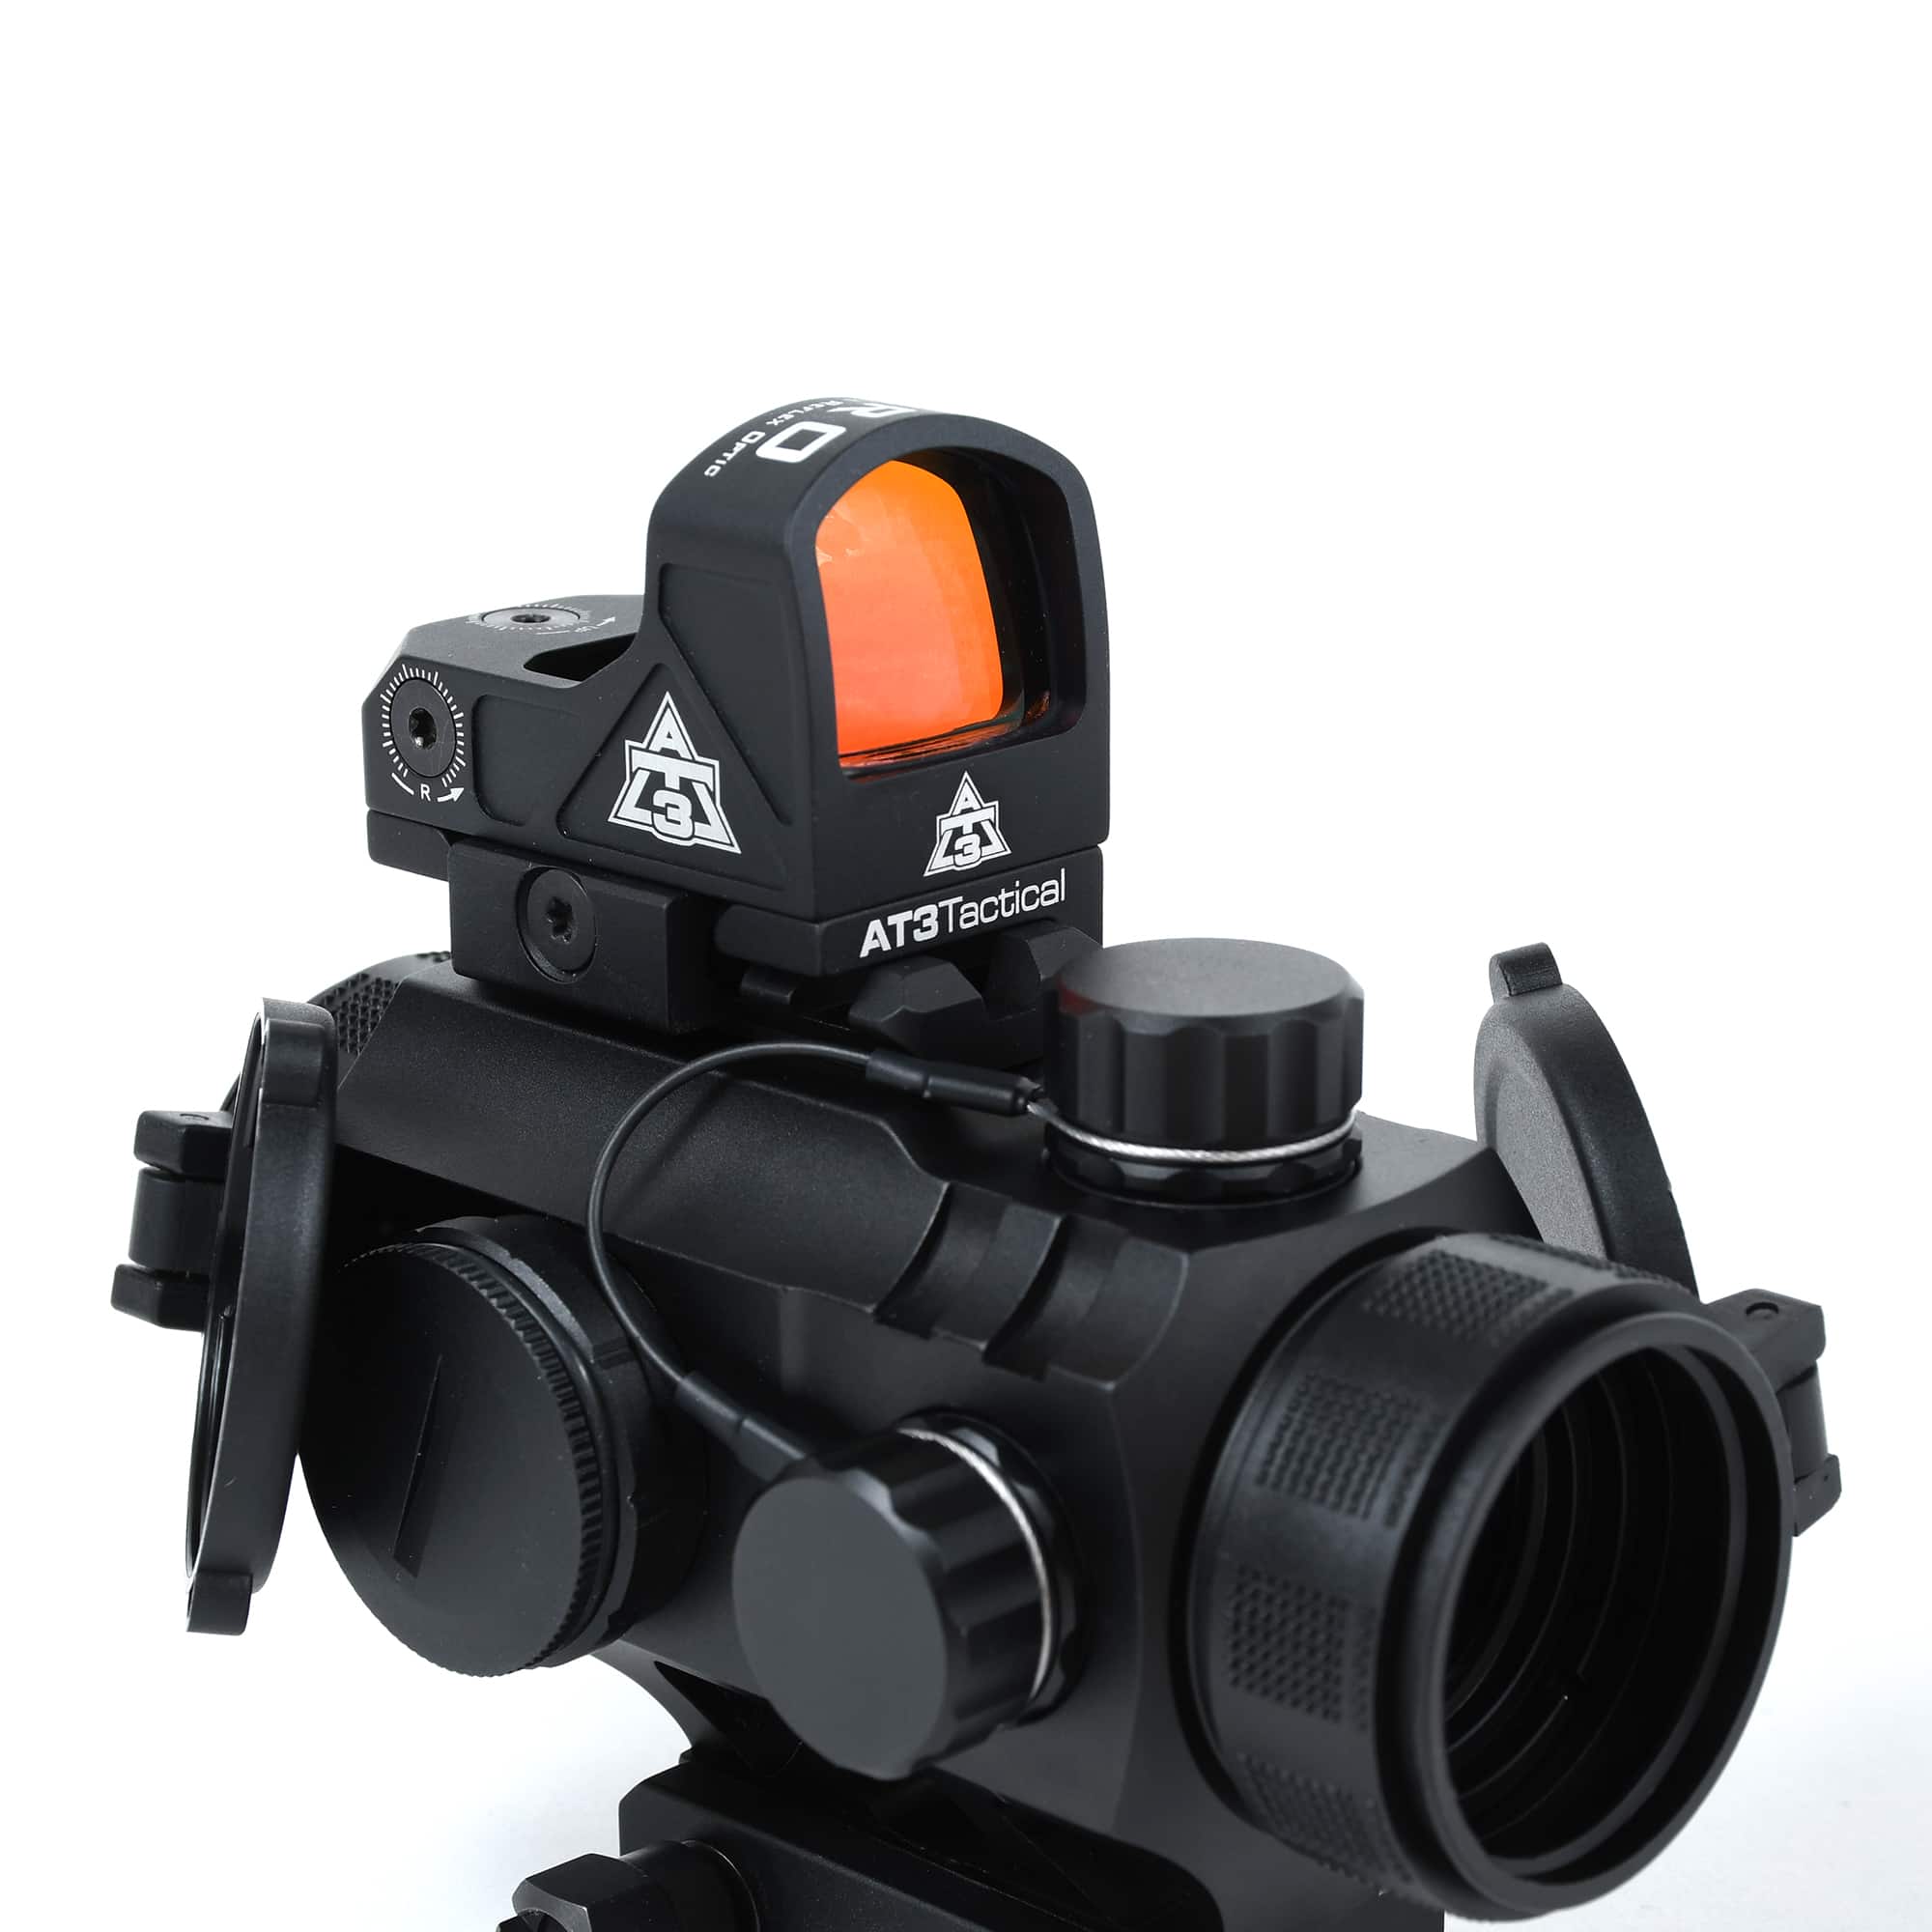 tapperhed mølle Observere AT3™ 3XP + ARO Combo - Includes 3x Prism Scope & Micro Red Dot Reflex Sight